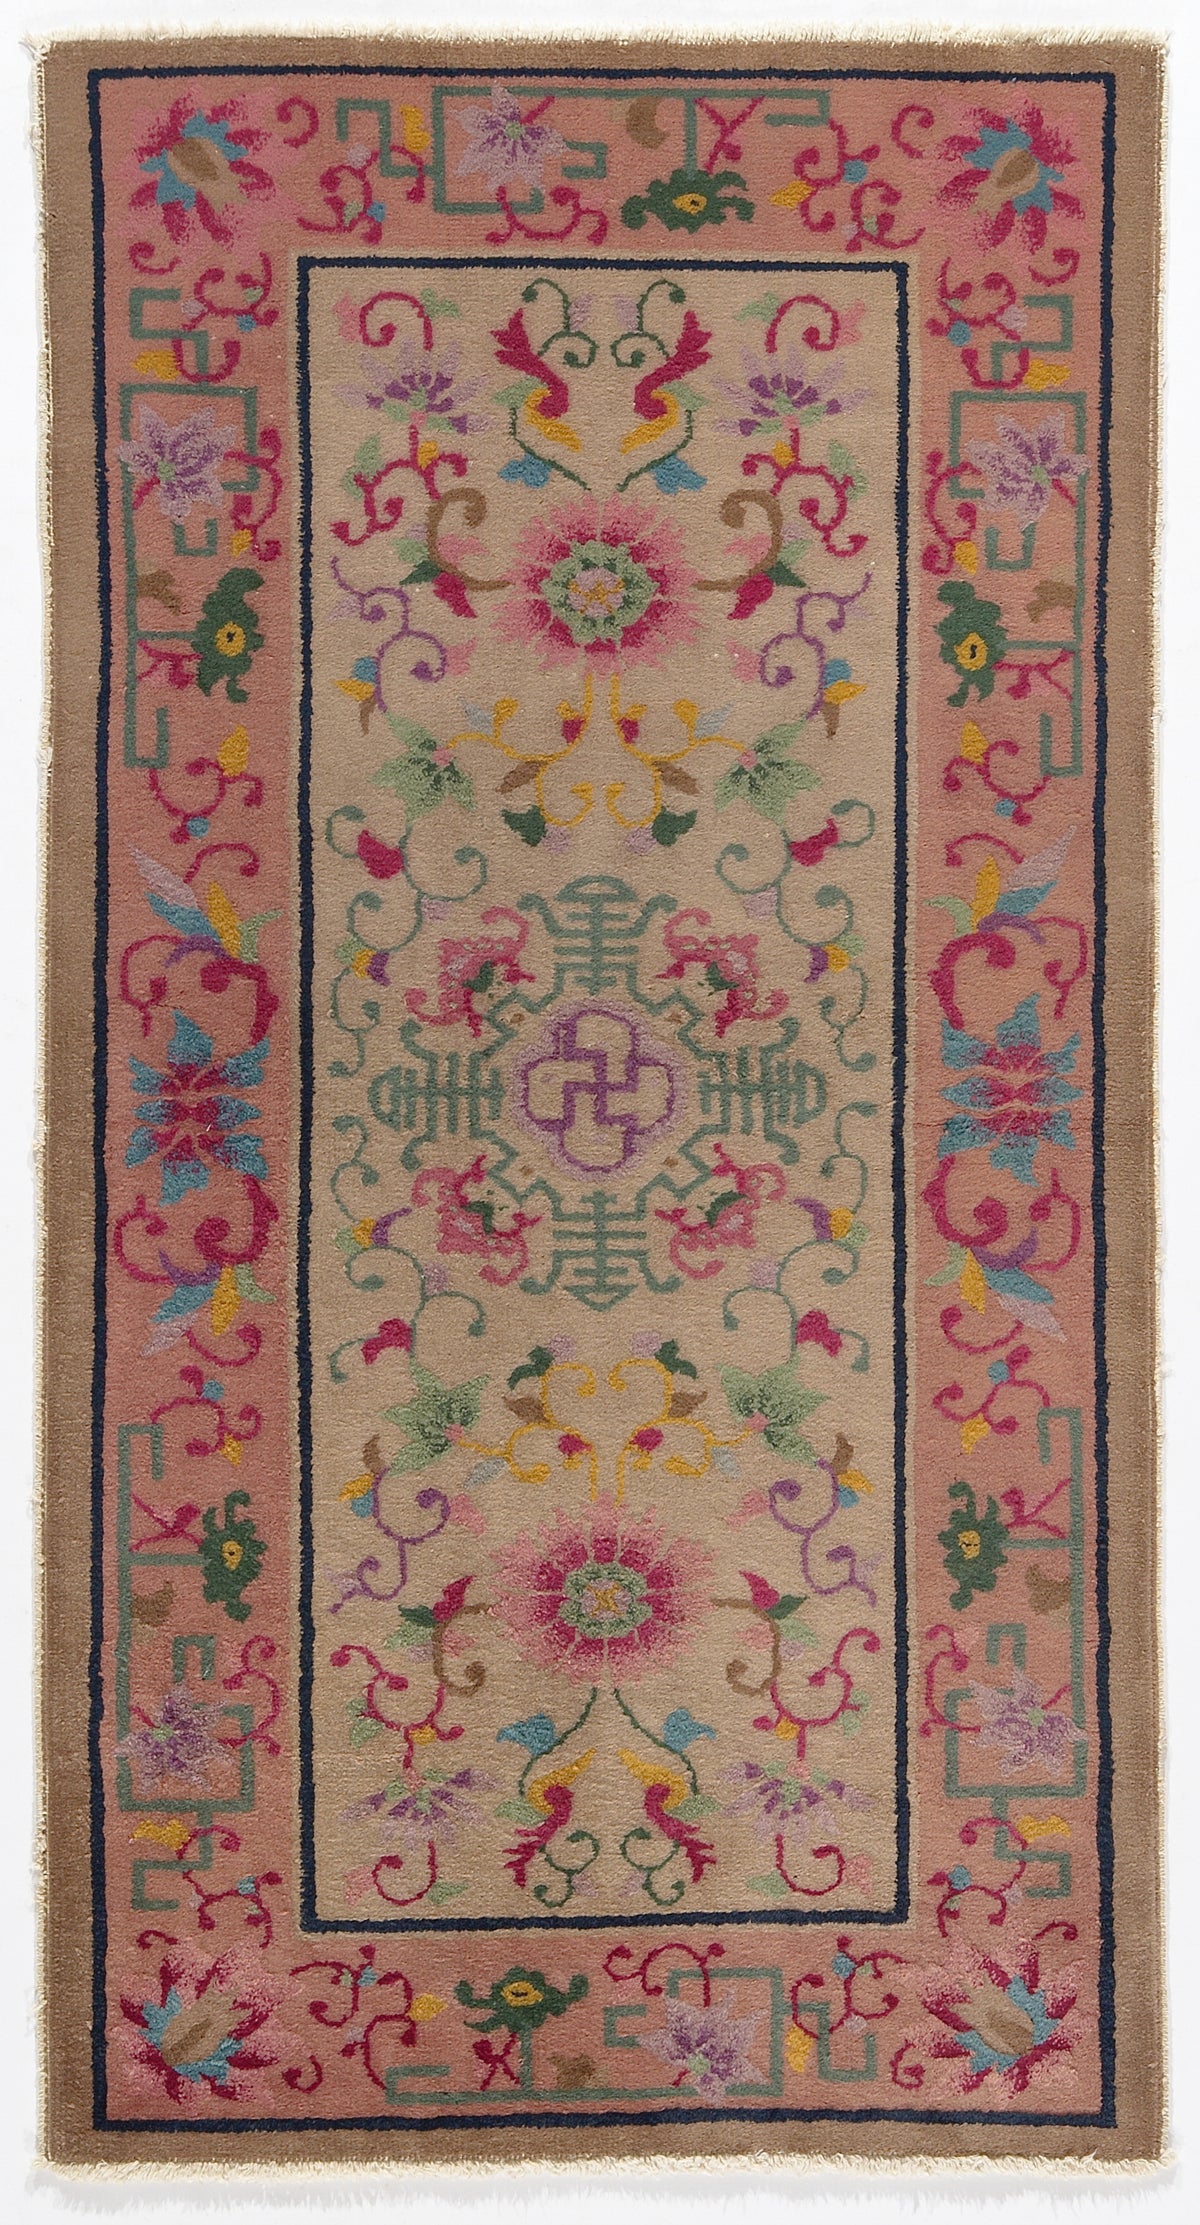 3x5 Rectangular Pink and Beige Tan Floral Vintage Hand Knotted Chinese Art Deco Wool Rug